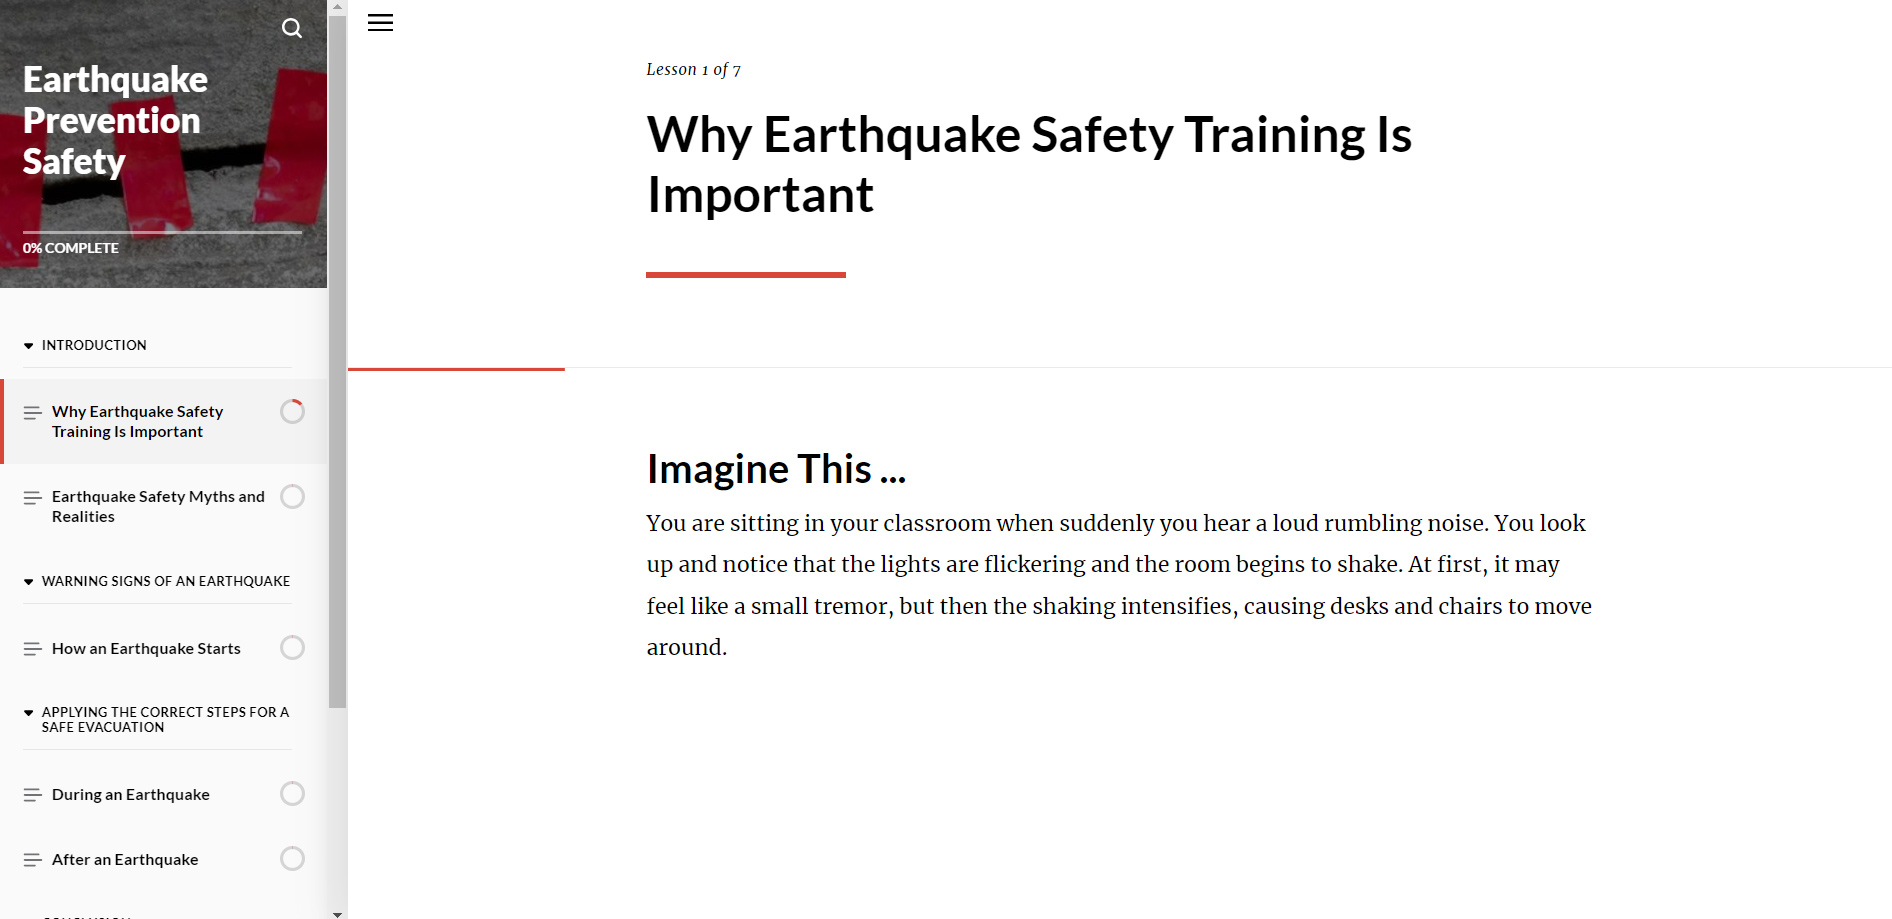 Training - Earthquake Prevention Safety